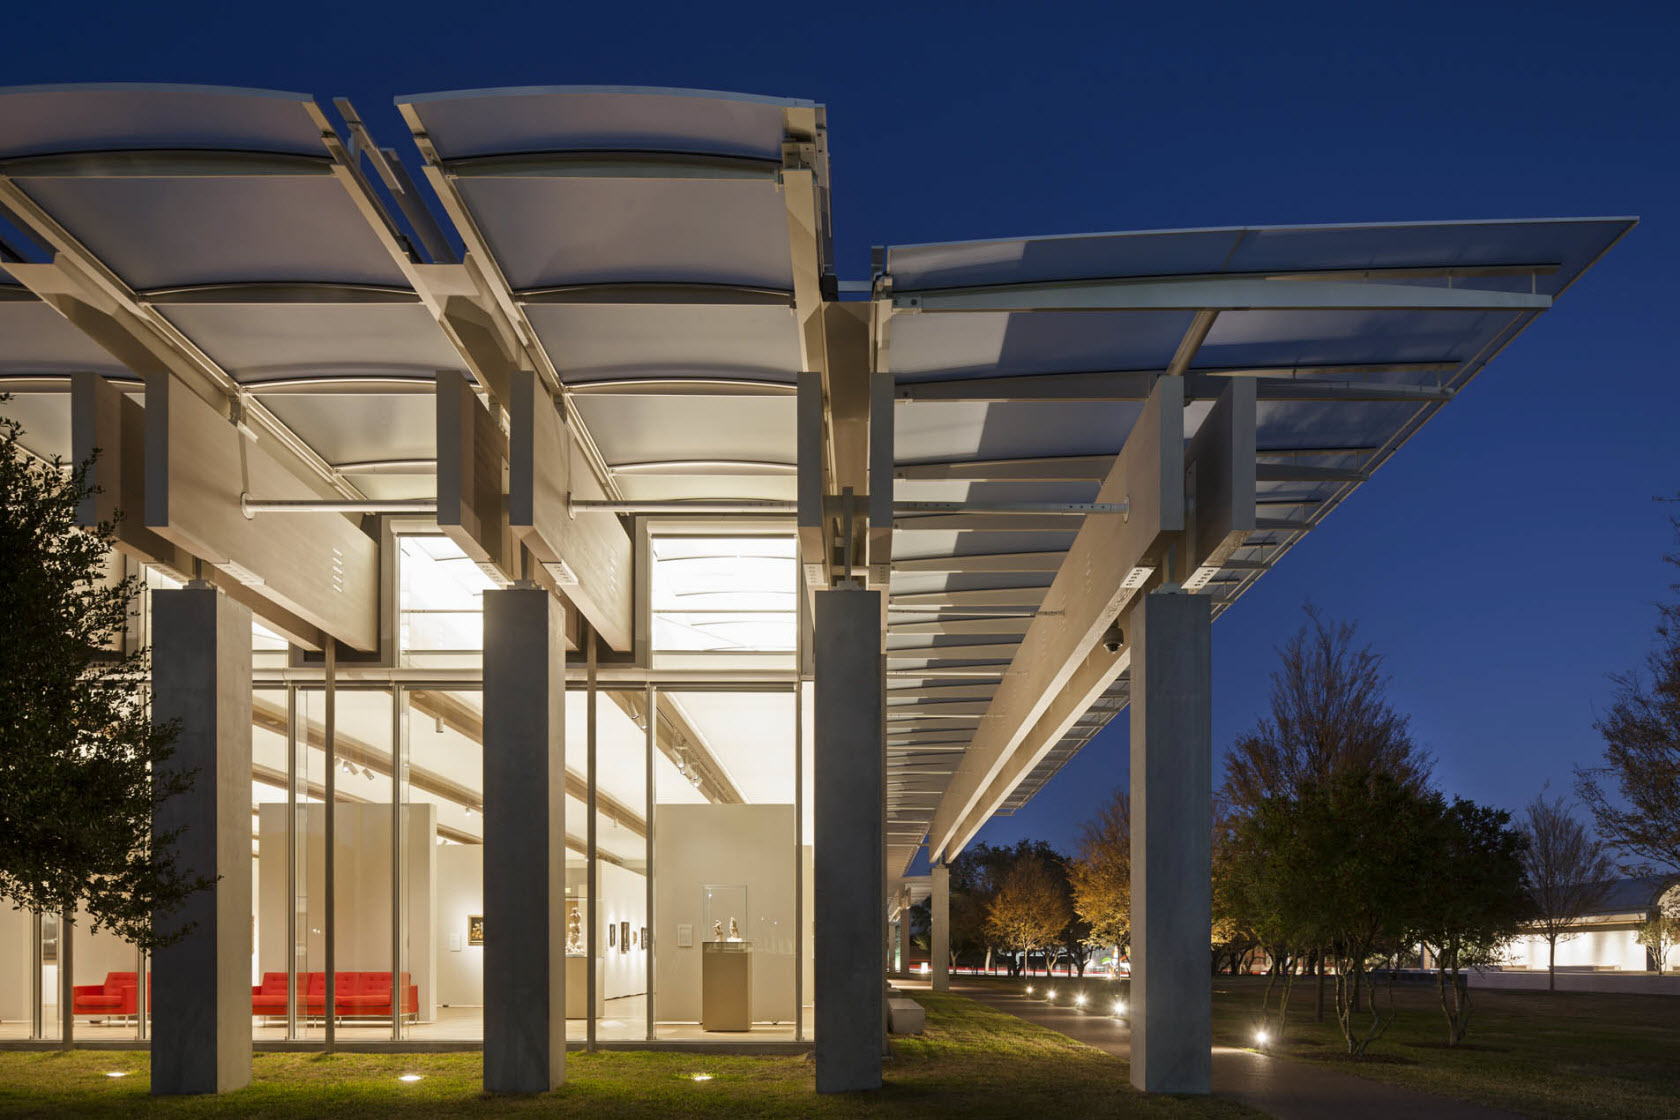 The Piano Pavilion at the Kimbell Art Museum, Texas